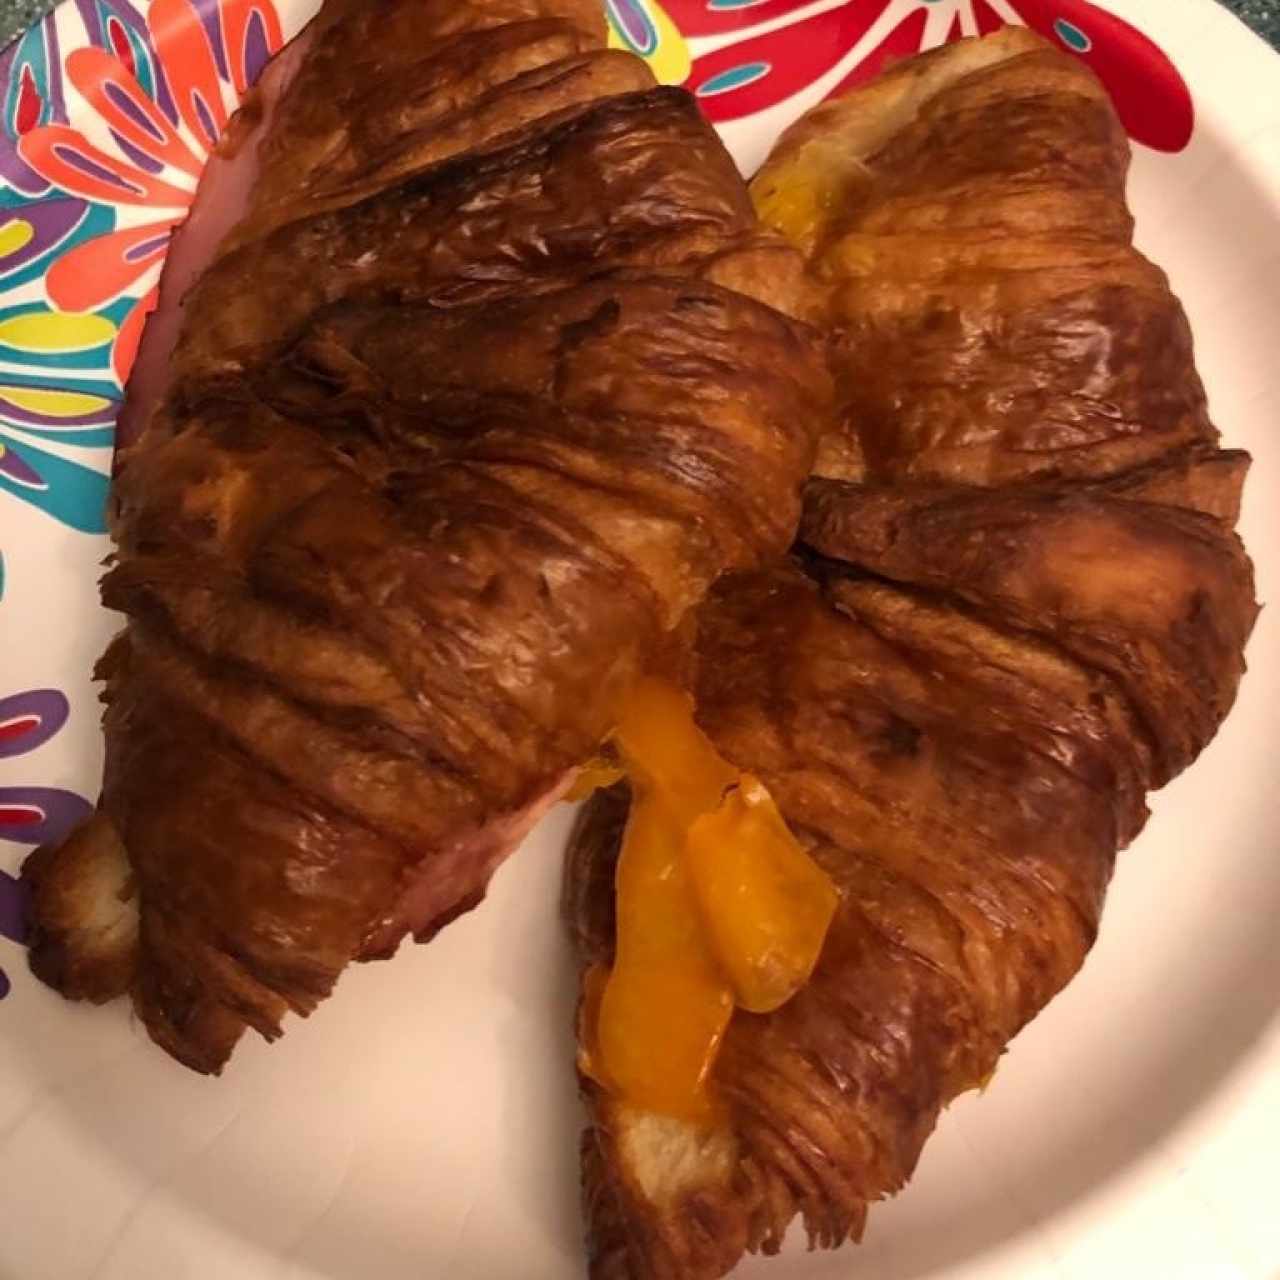 Double Cheese Croissant